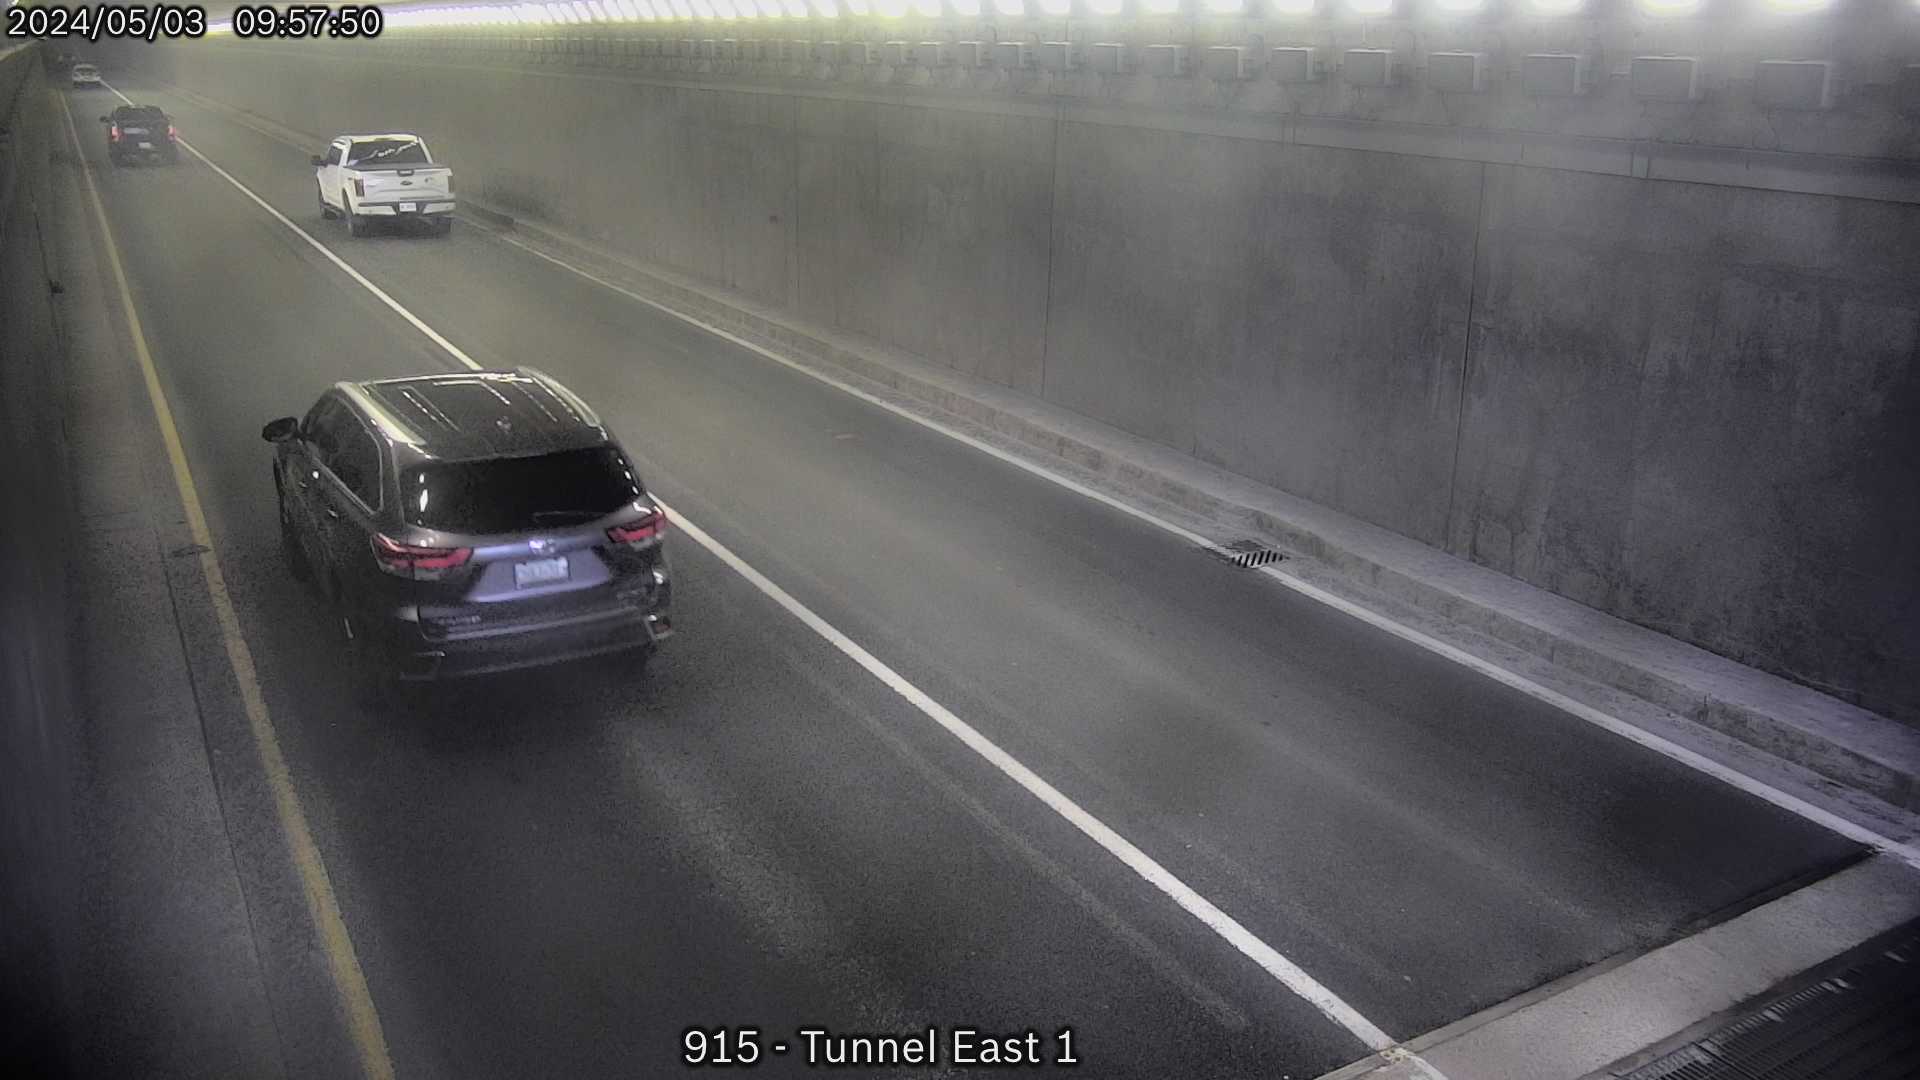 Traffic Camera EastBound Thorold Tunnel near East of entrance